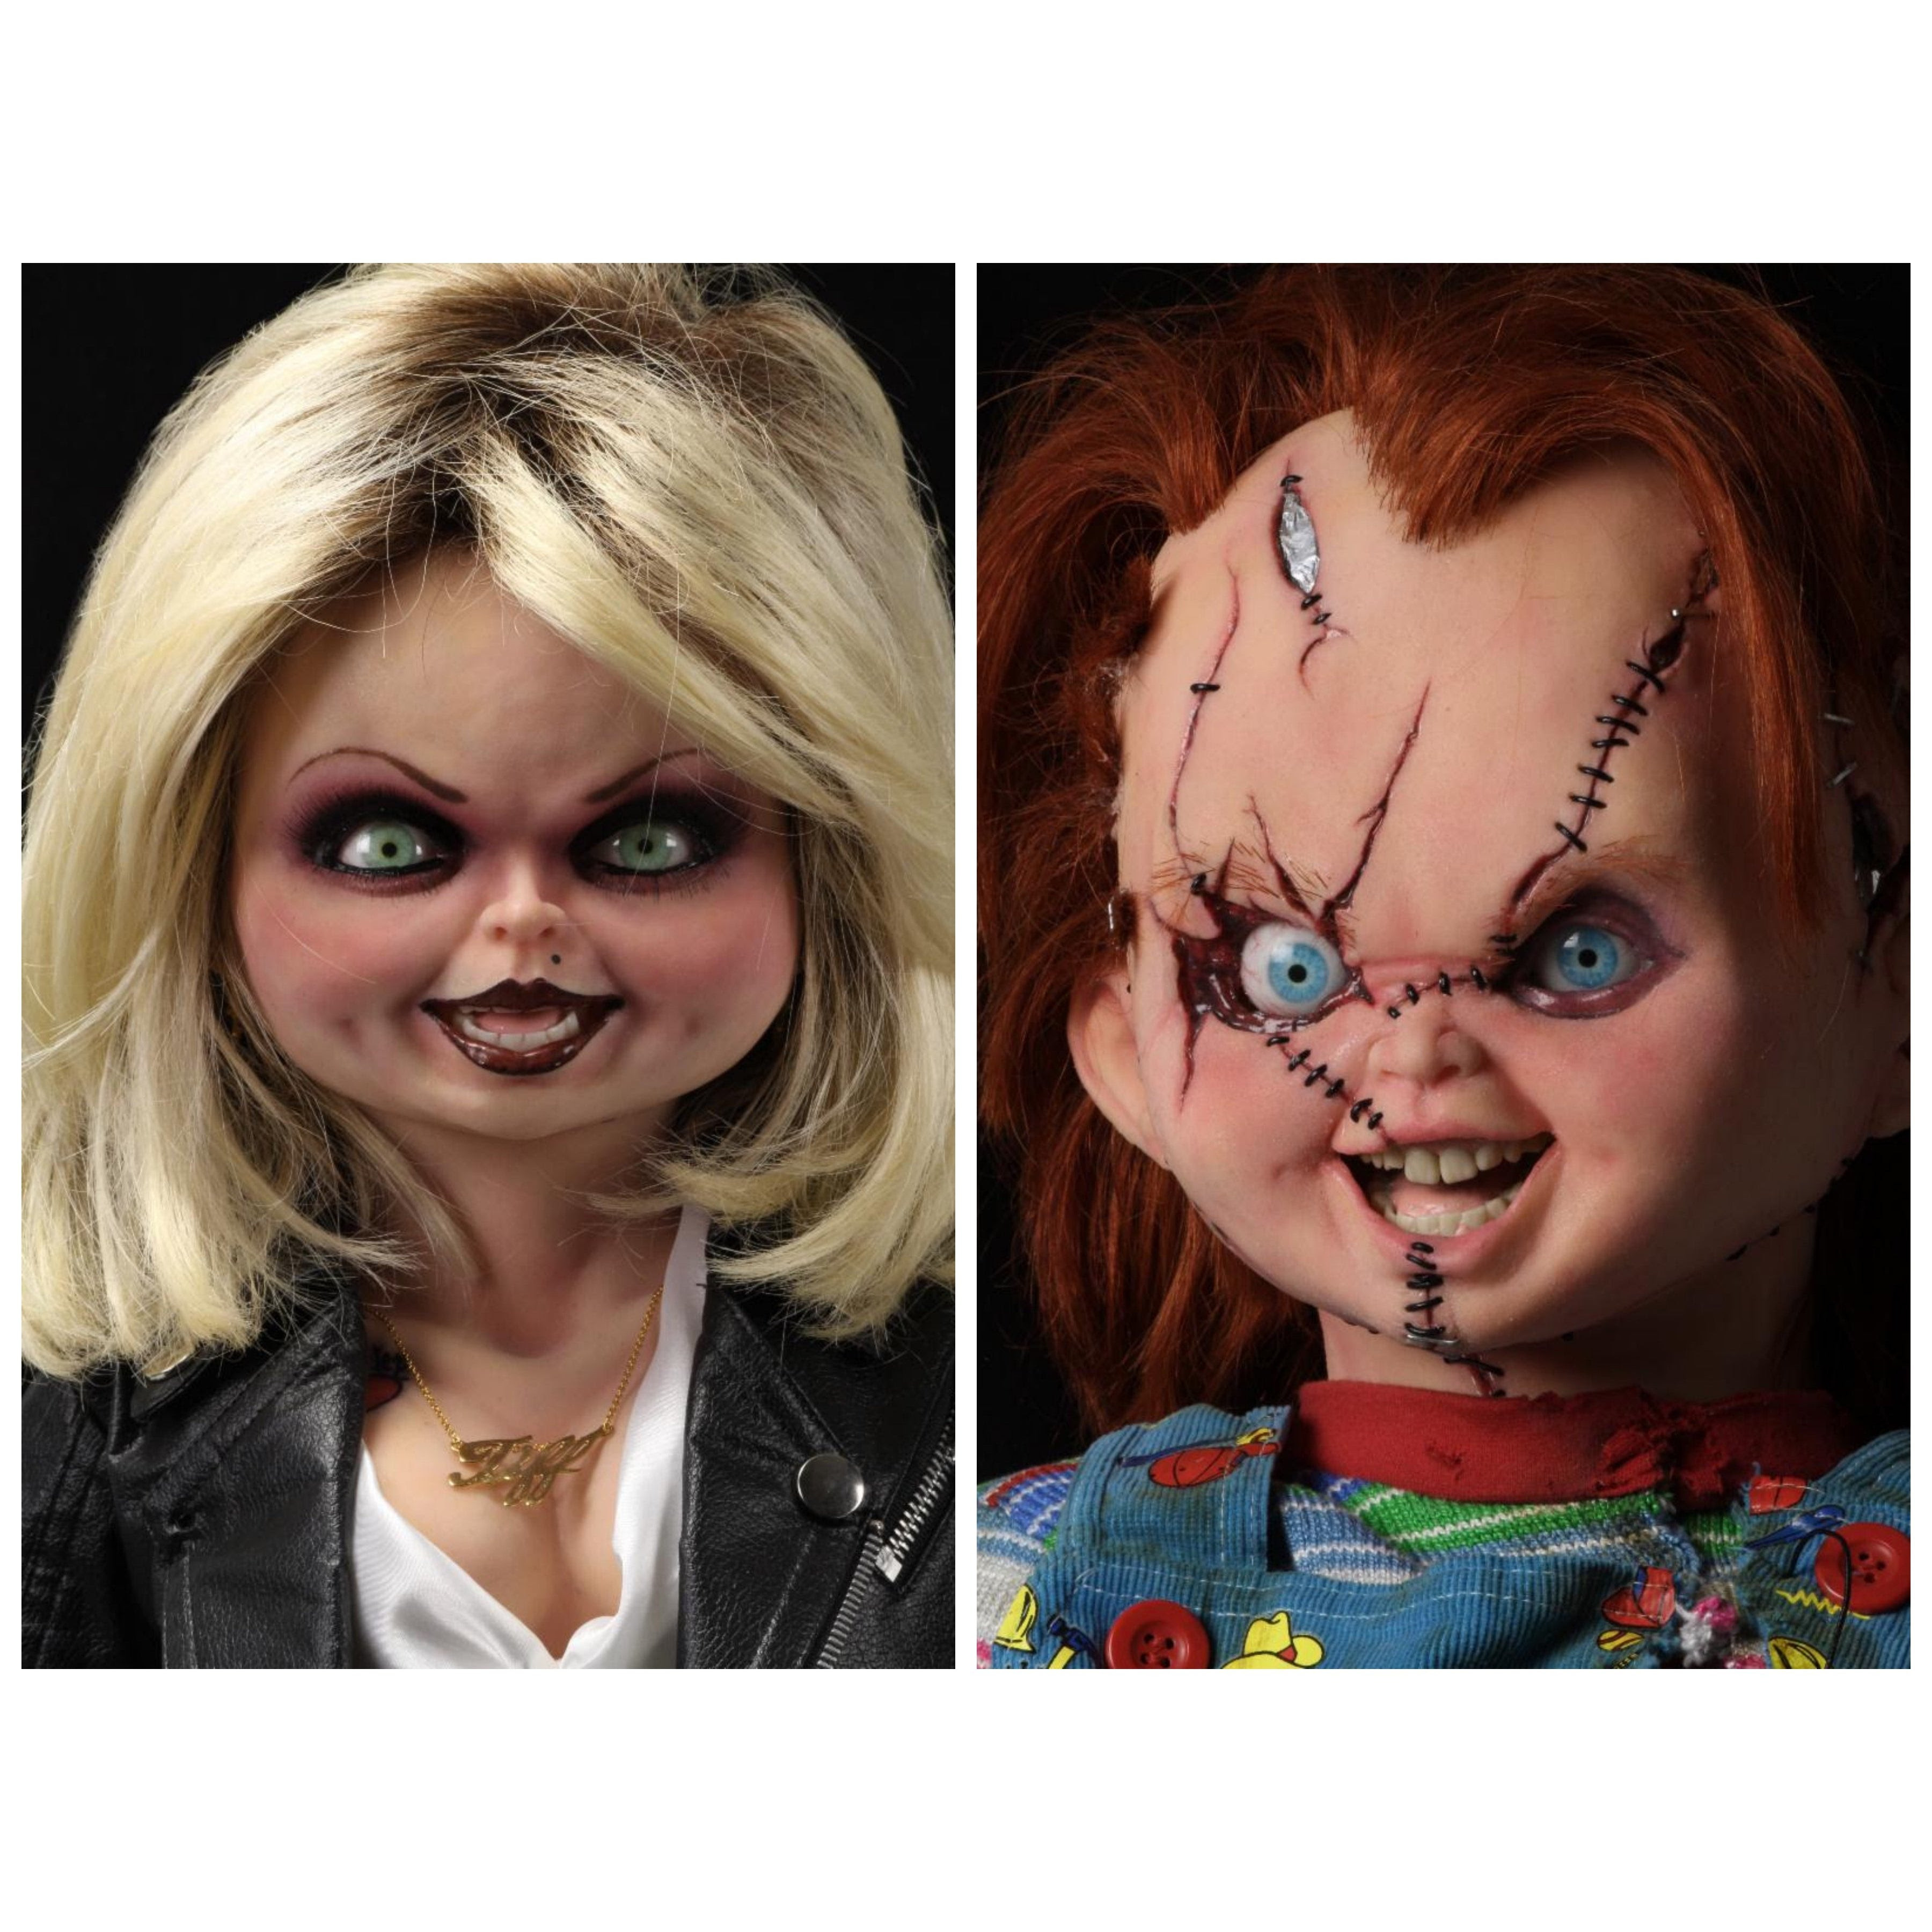 Image of Bride of Chucky - 1:1 Replica - Life-Size - Set of 2 - FEBRUARY 2020